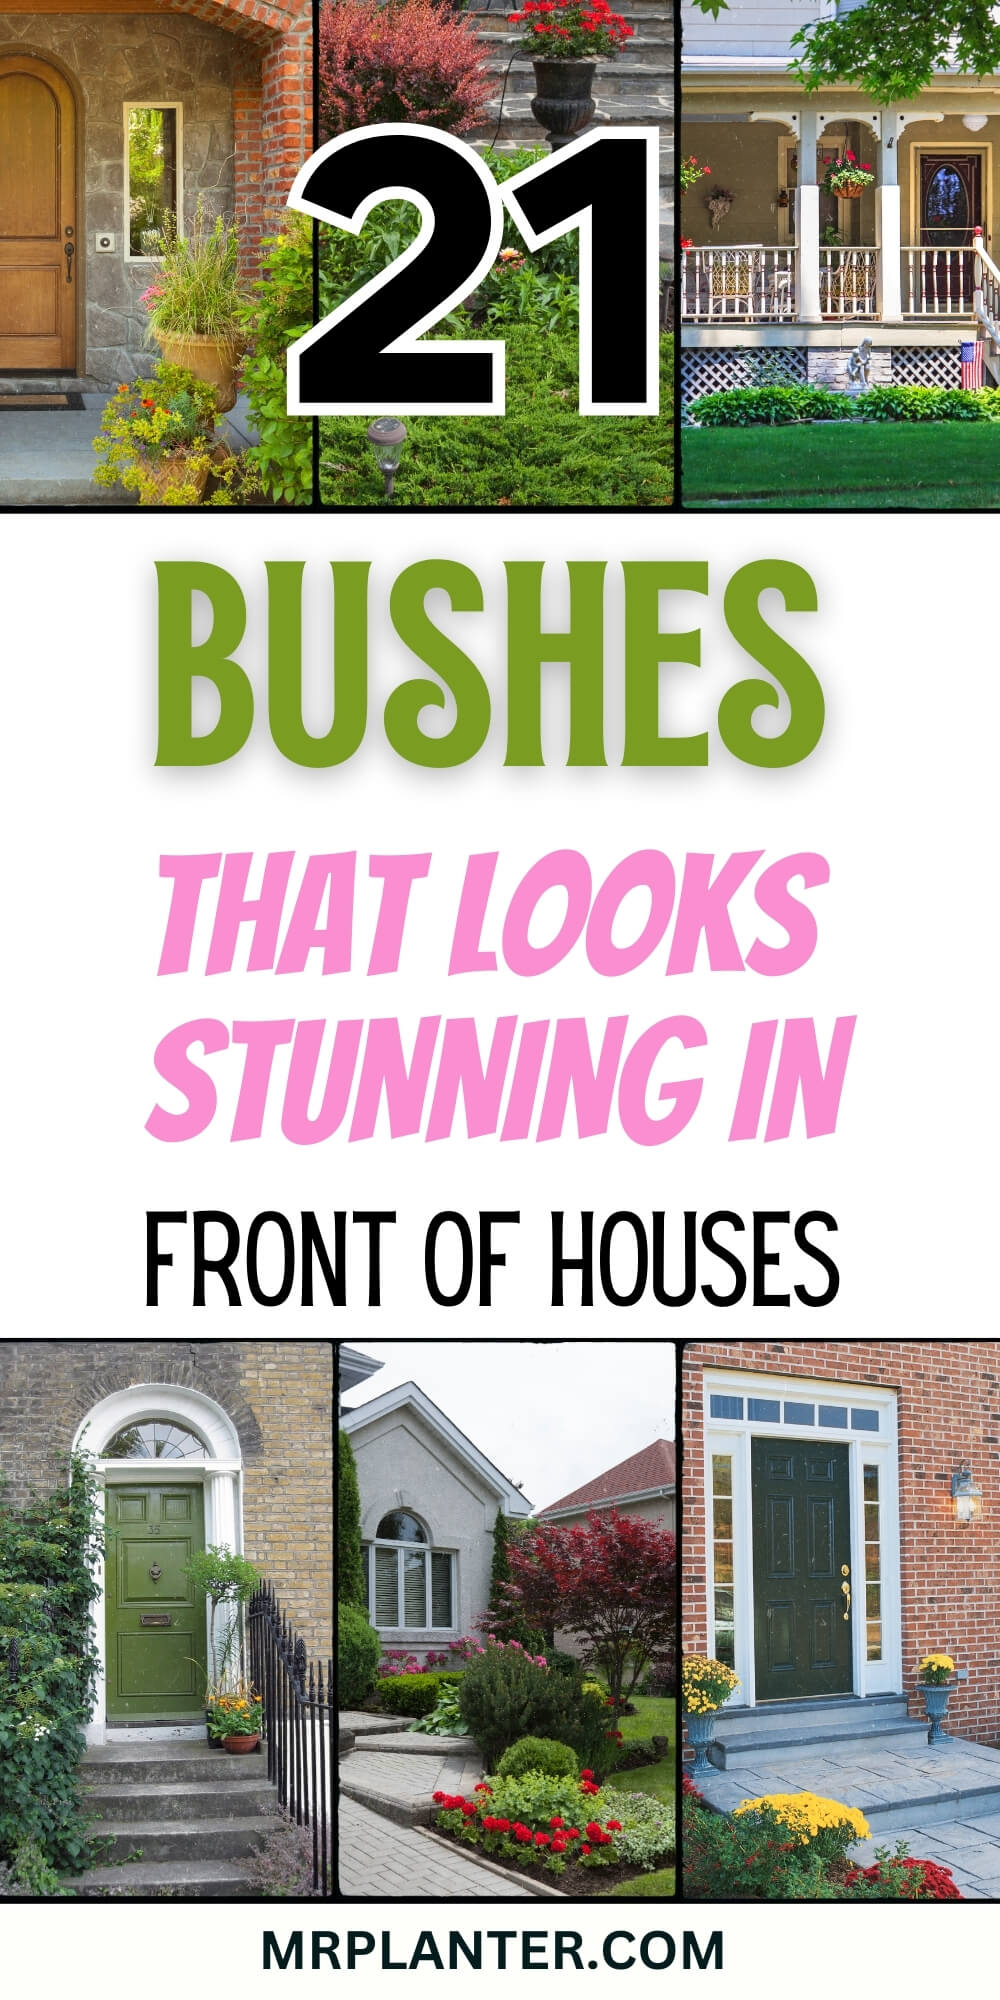 21 Bushes that Look Stunning in Front of Houses